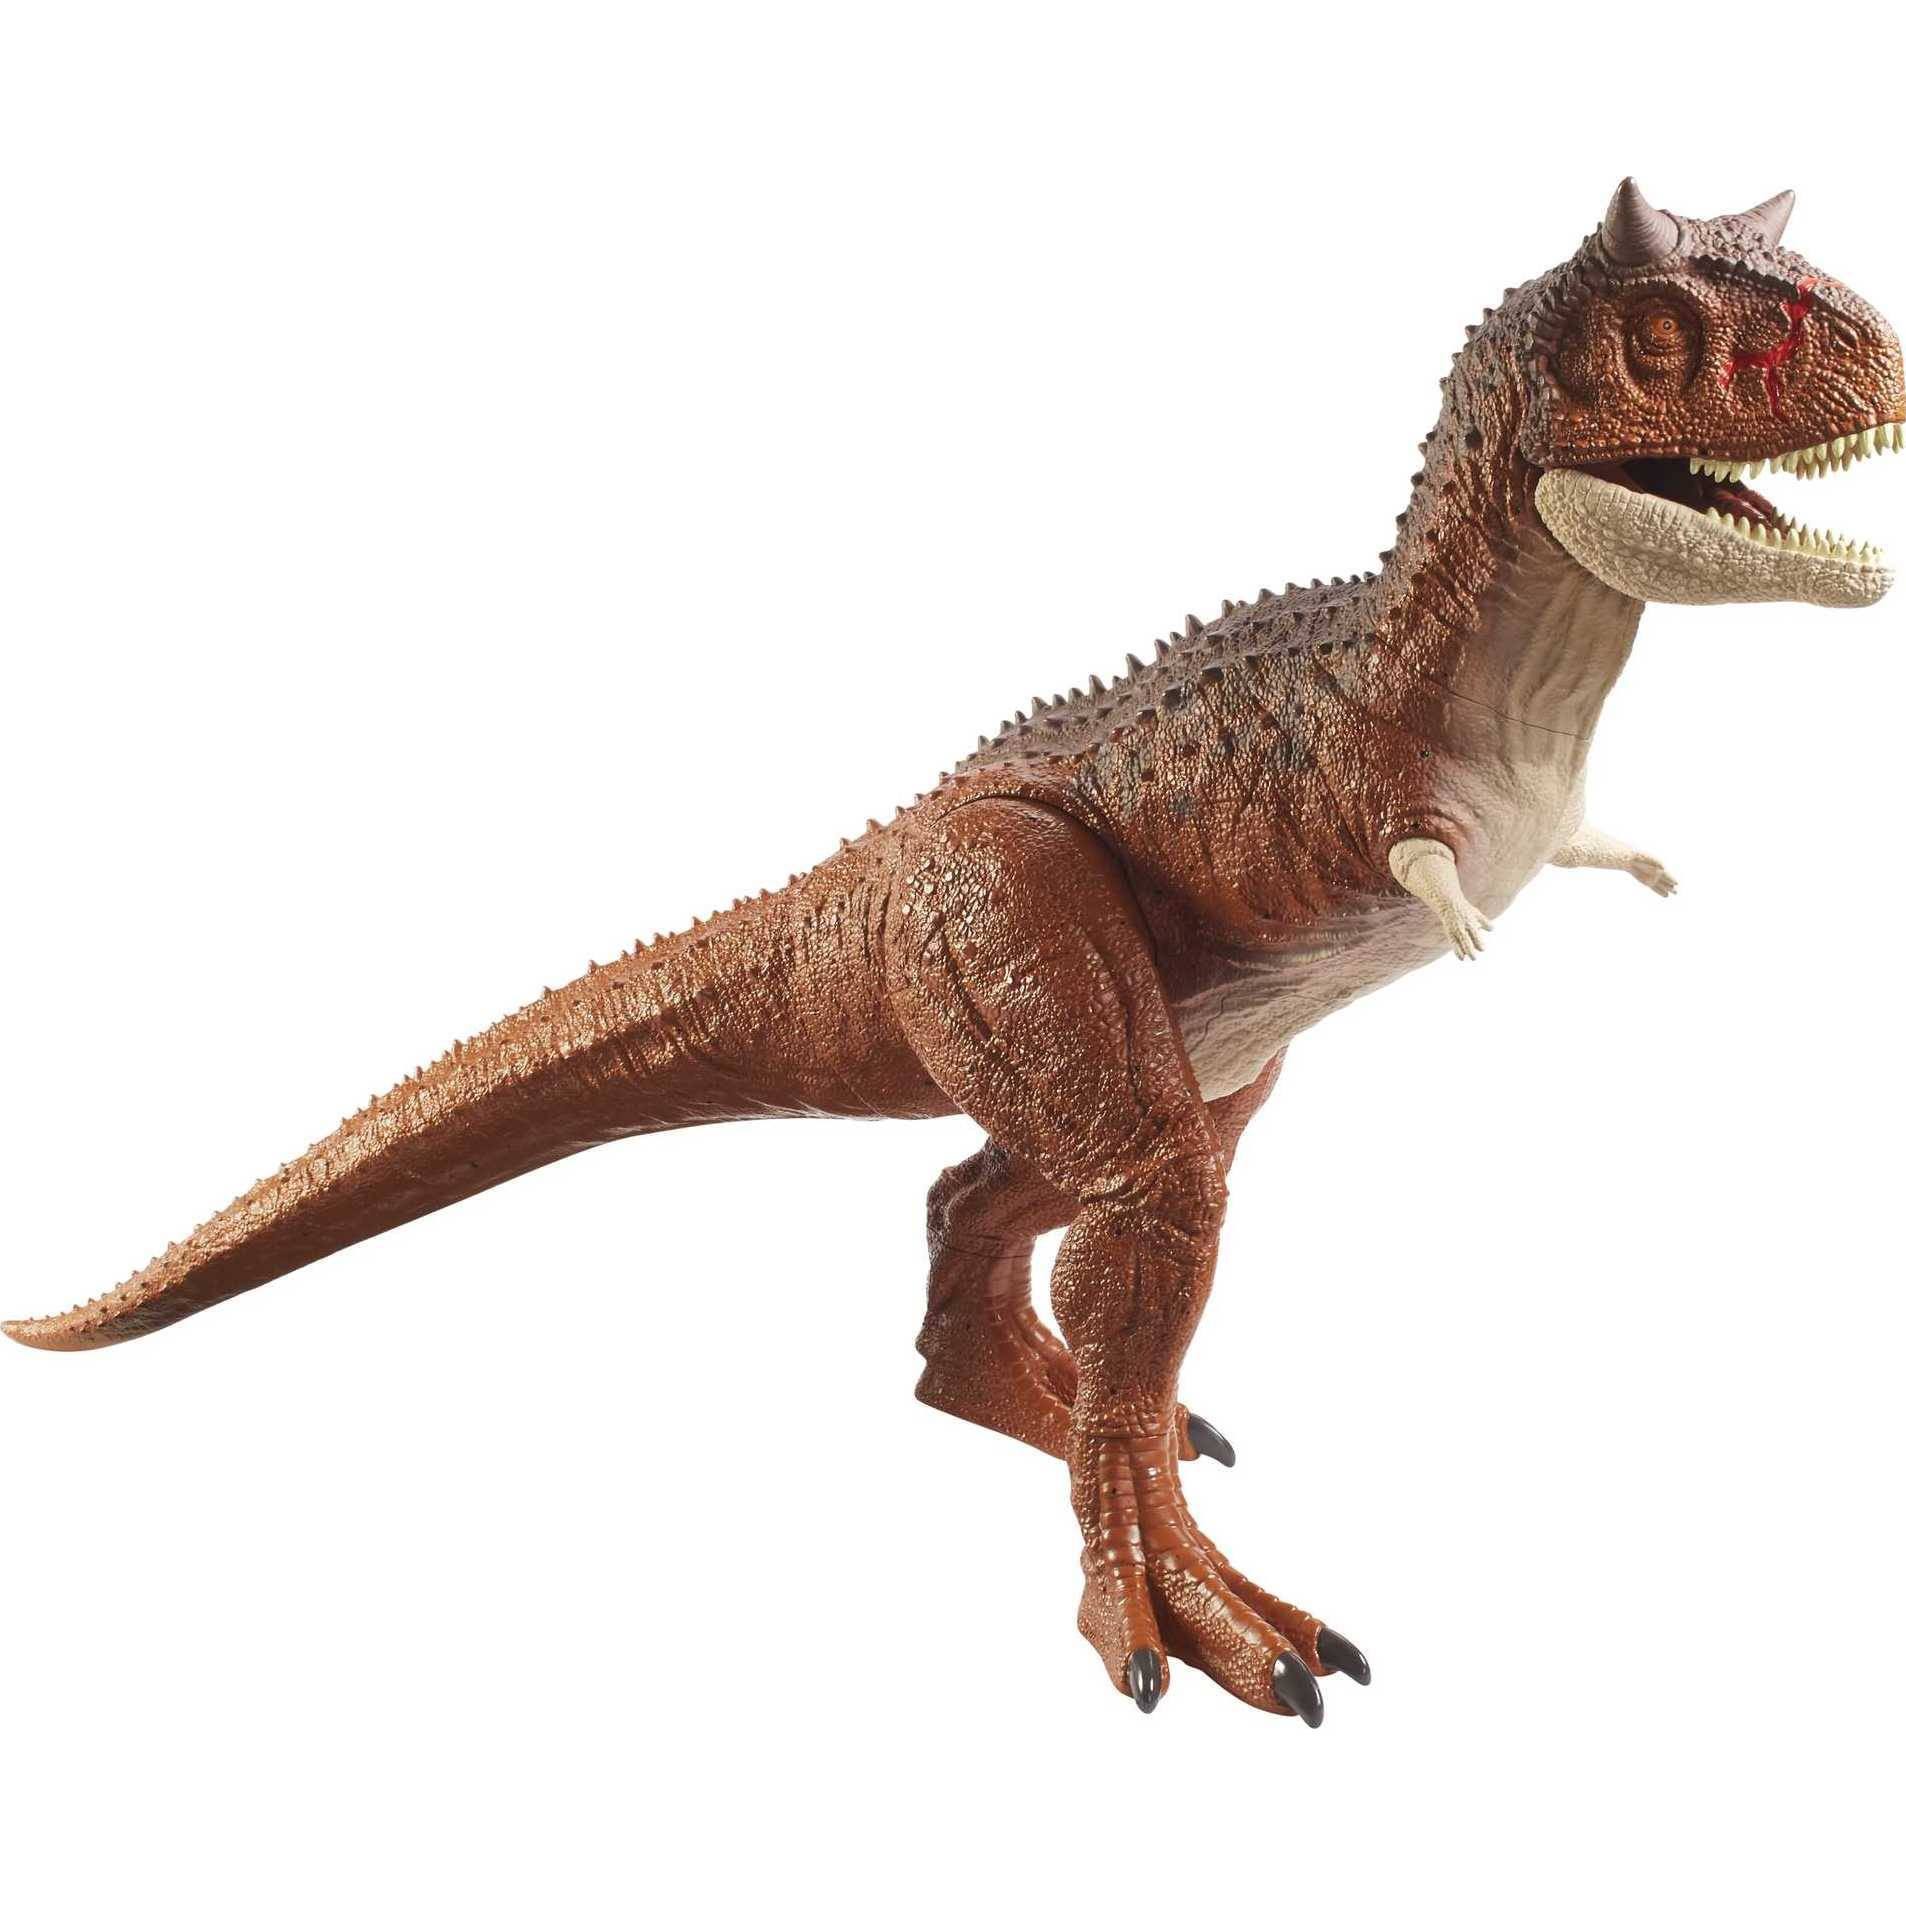 ​Jurassic World Colossal Carnotaurus Toro Dinosaur Action Figure Camp Cretaceous with Stomach-Release Feature, 36-in/91-cm Long, Realistic Sculpting, Kid Gift Age 4 Years & Up - image 1 of 3